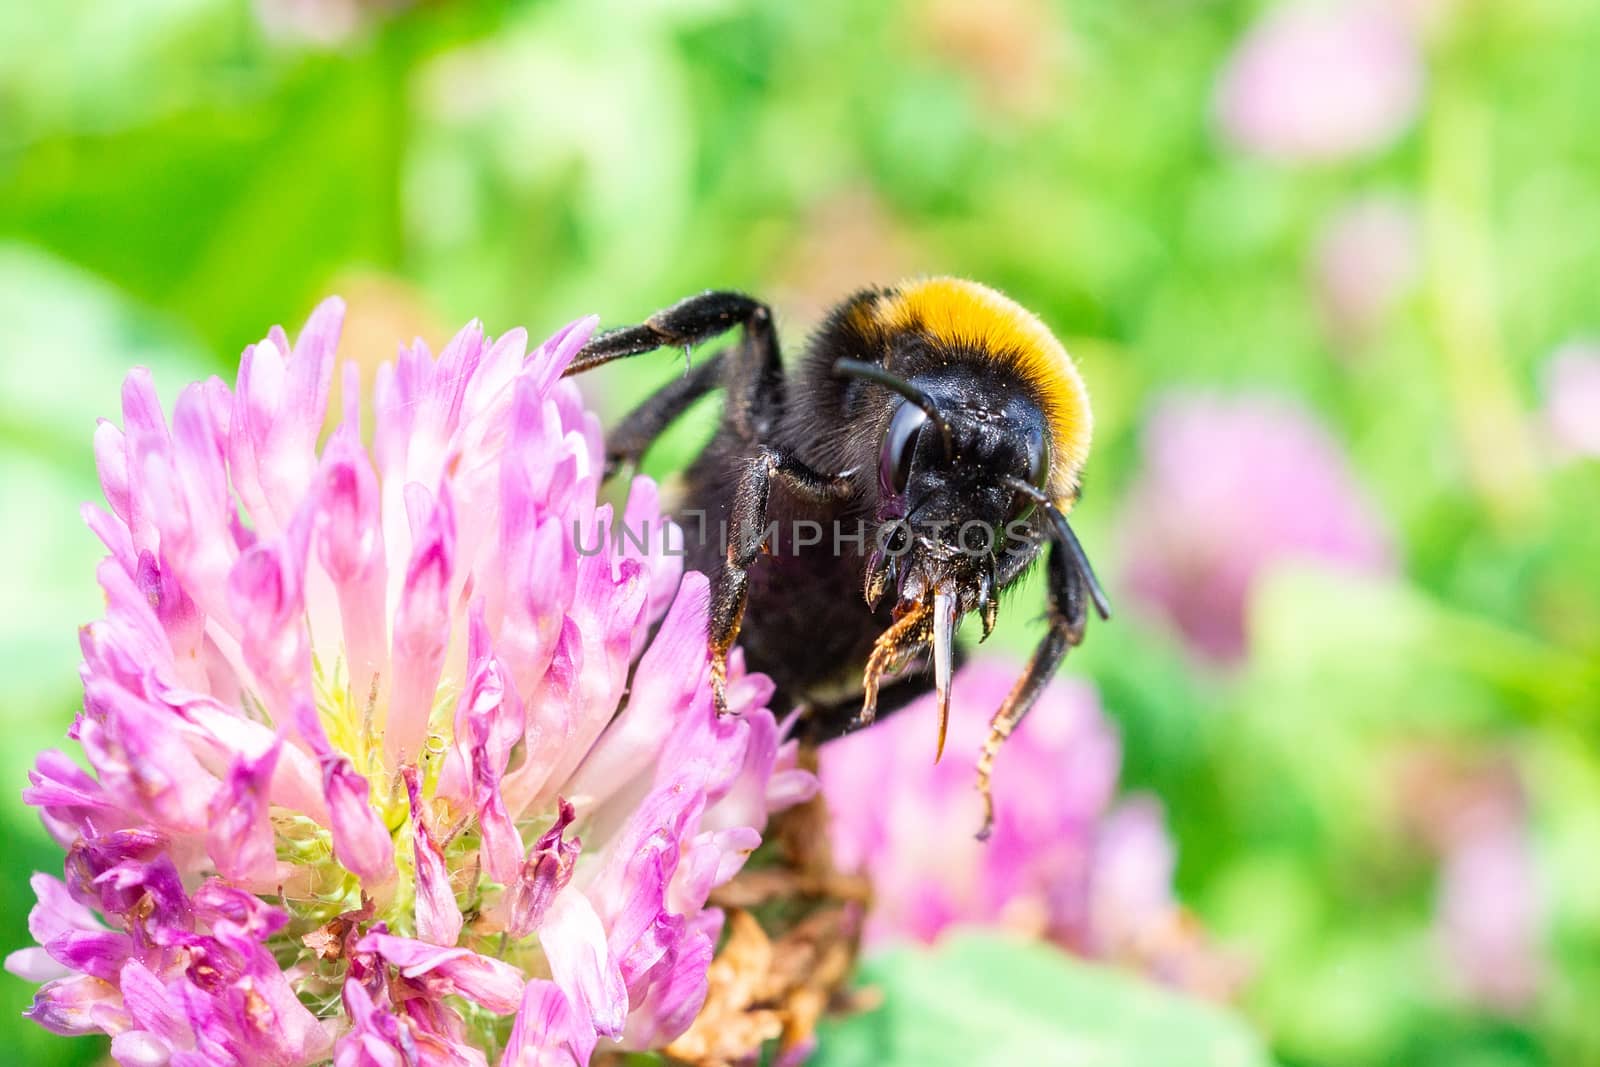 A bumblebee gathers pollen on a red flower, a bumblebee on a clover